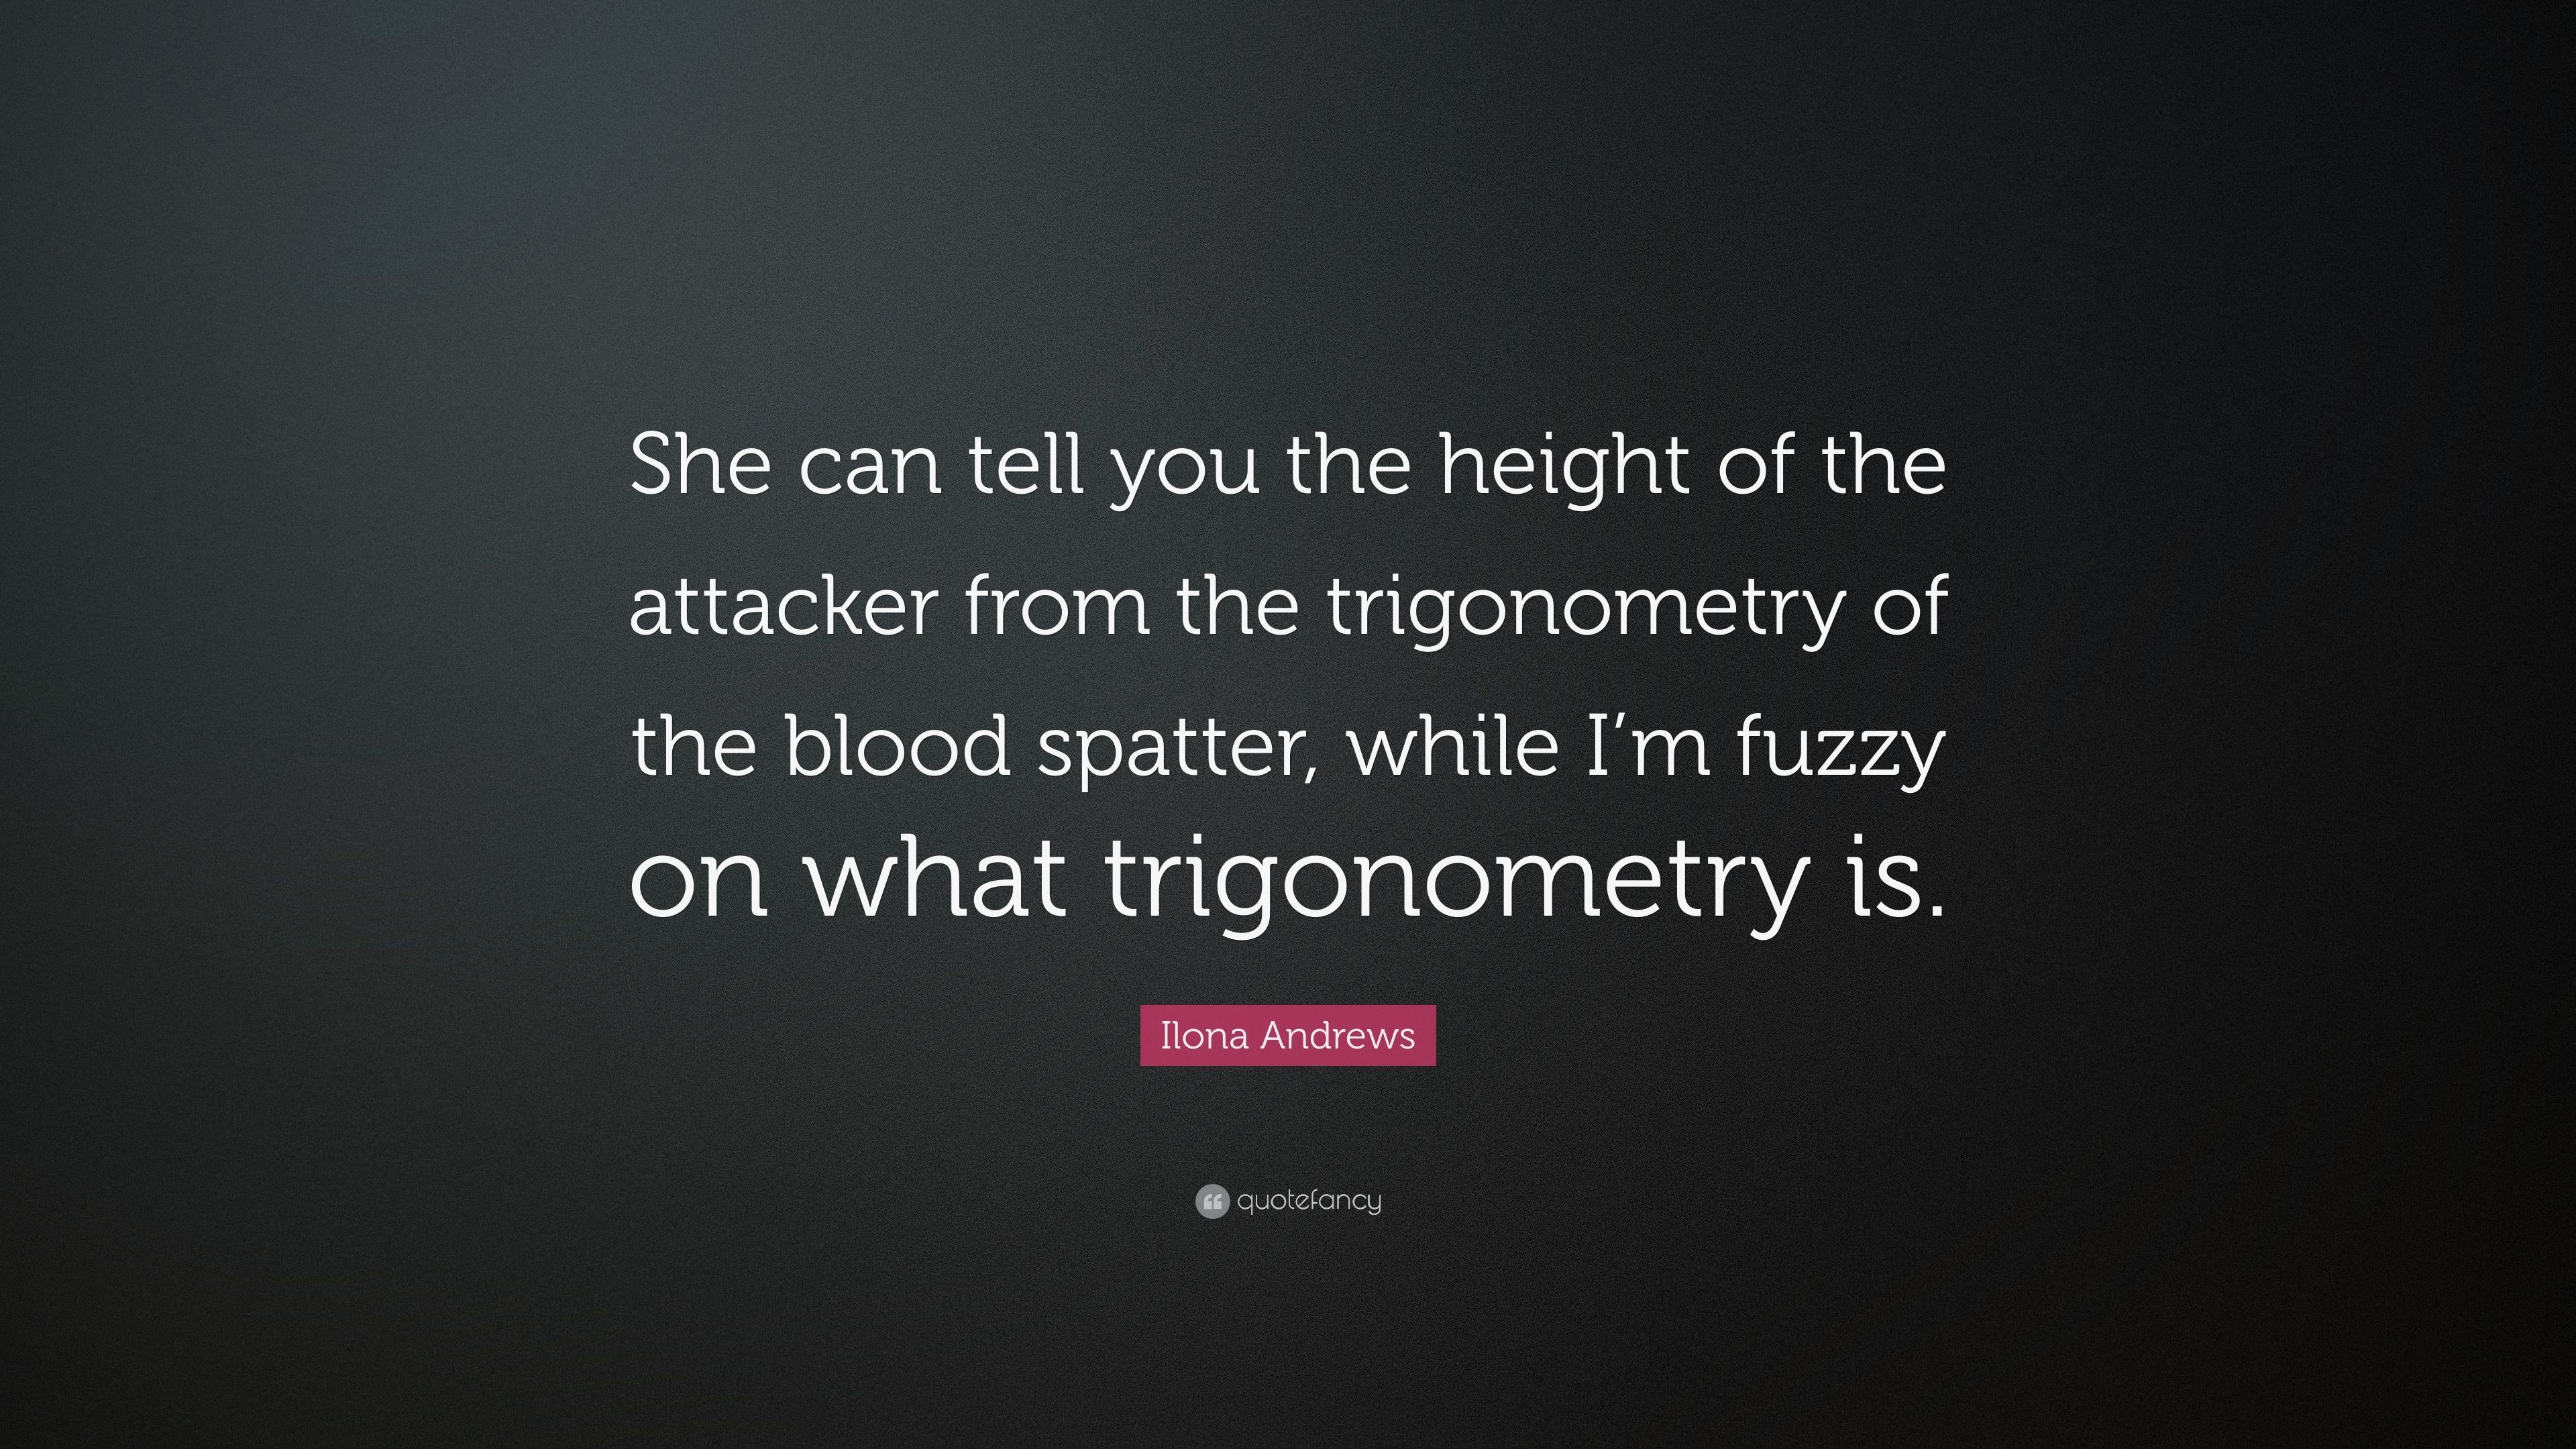 Ilona Andrews Quote: “She can tell you the height of the attacker from the trigonometry of the blood spatter, while I'm fuzzy on what trigonom.” (7 wallpaper)